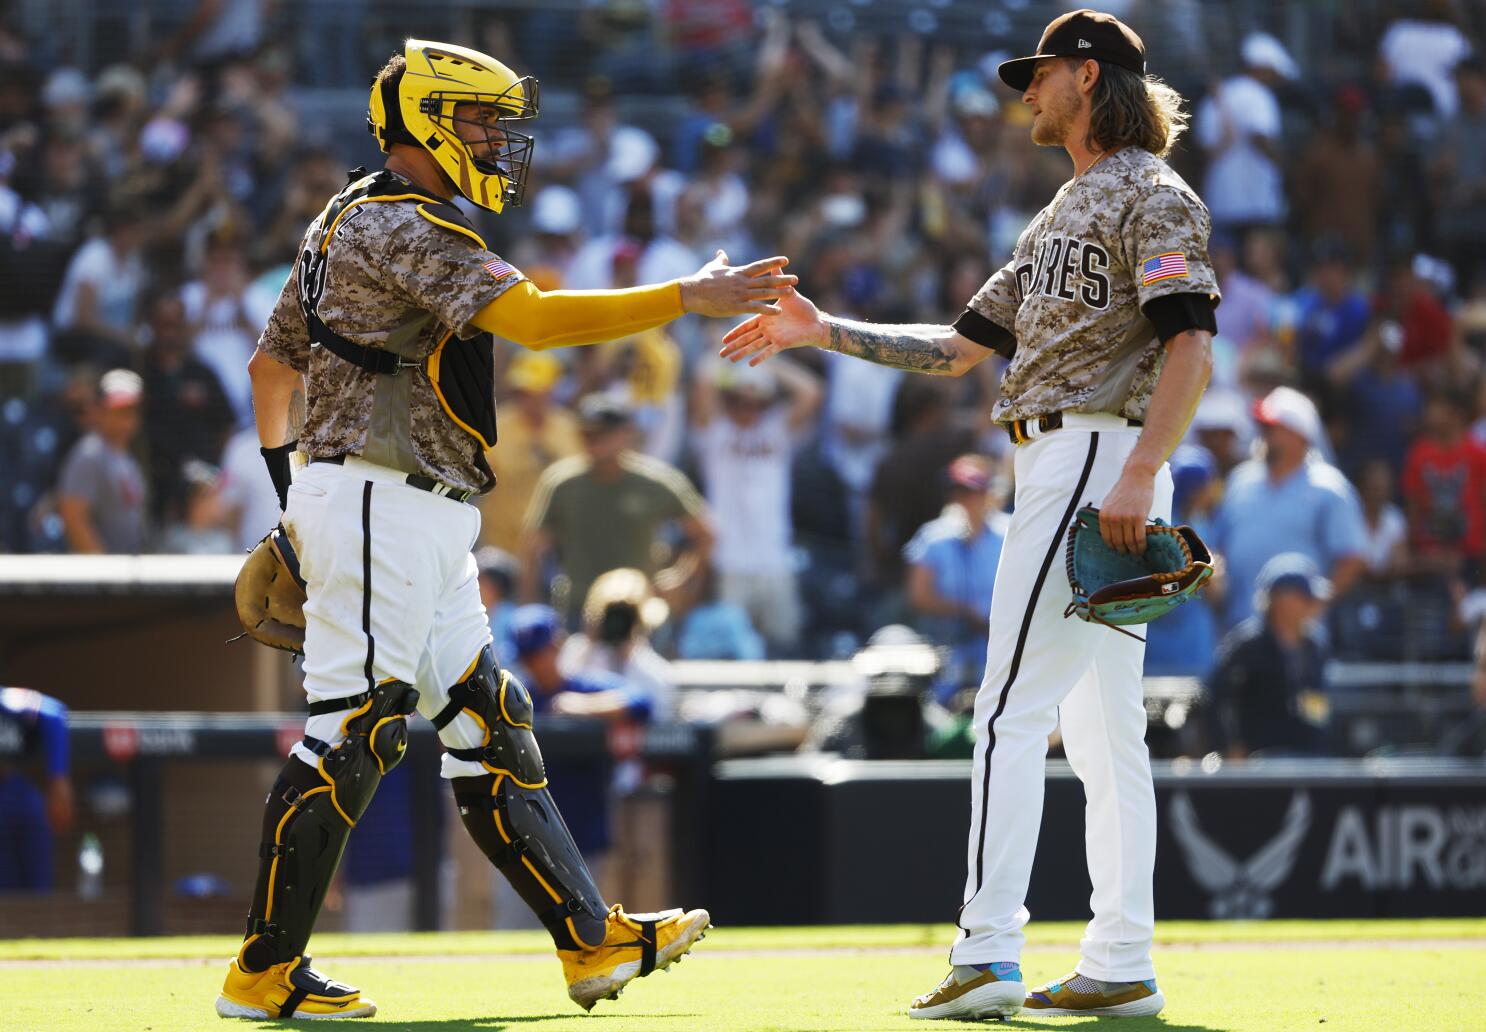 Snell lowers his MLB-best ERA to 2.50 and the Padres hit 4 homers